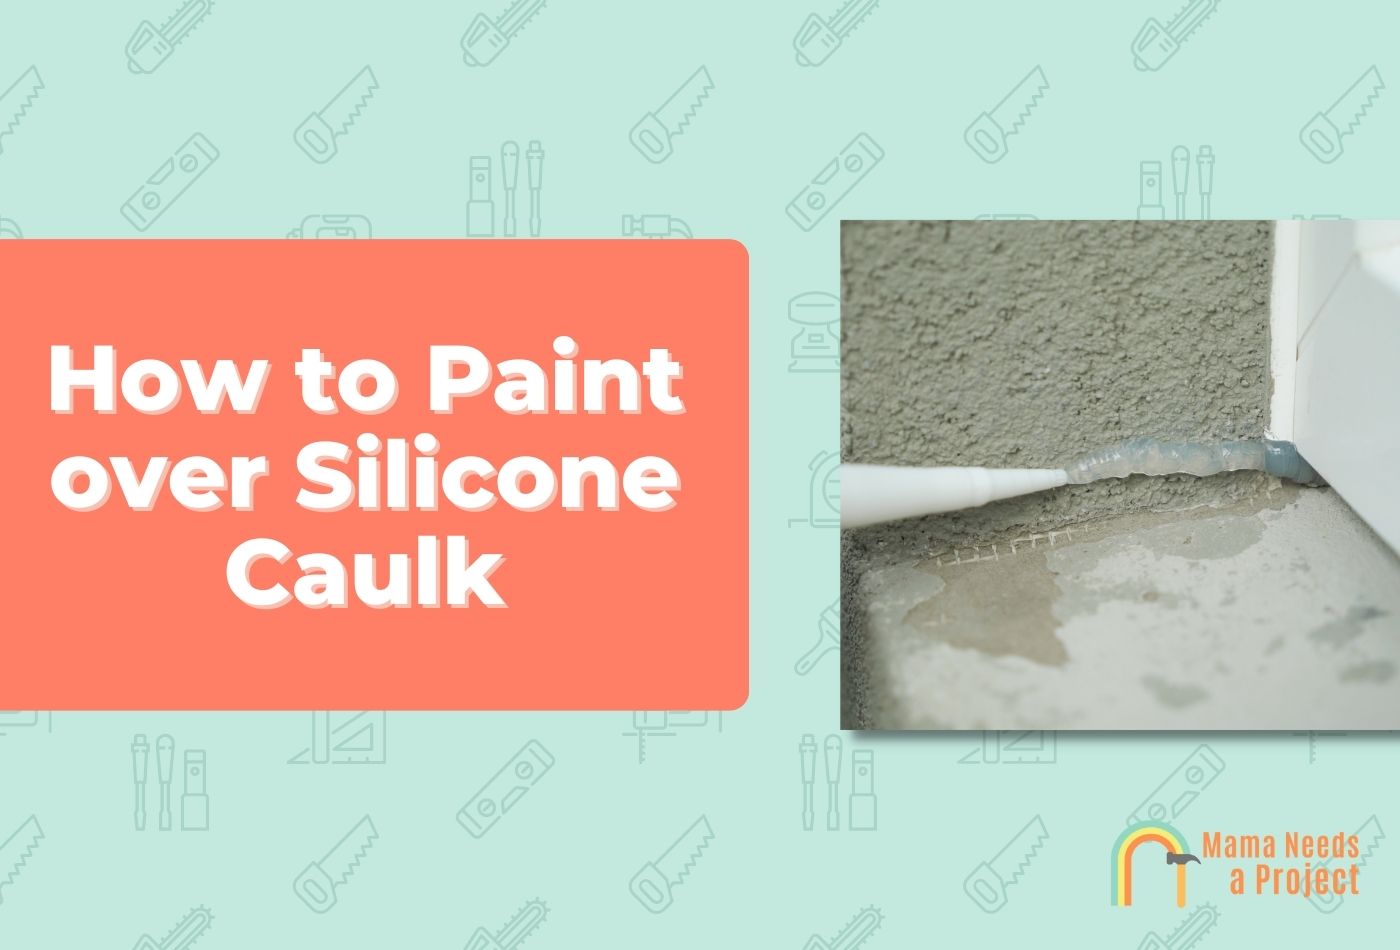 How to Paint over Silicone Caulk